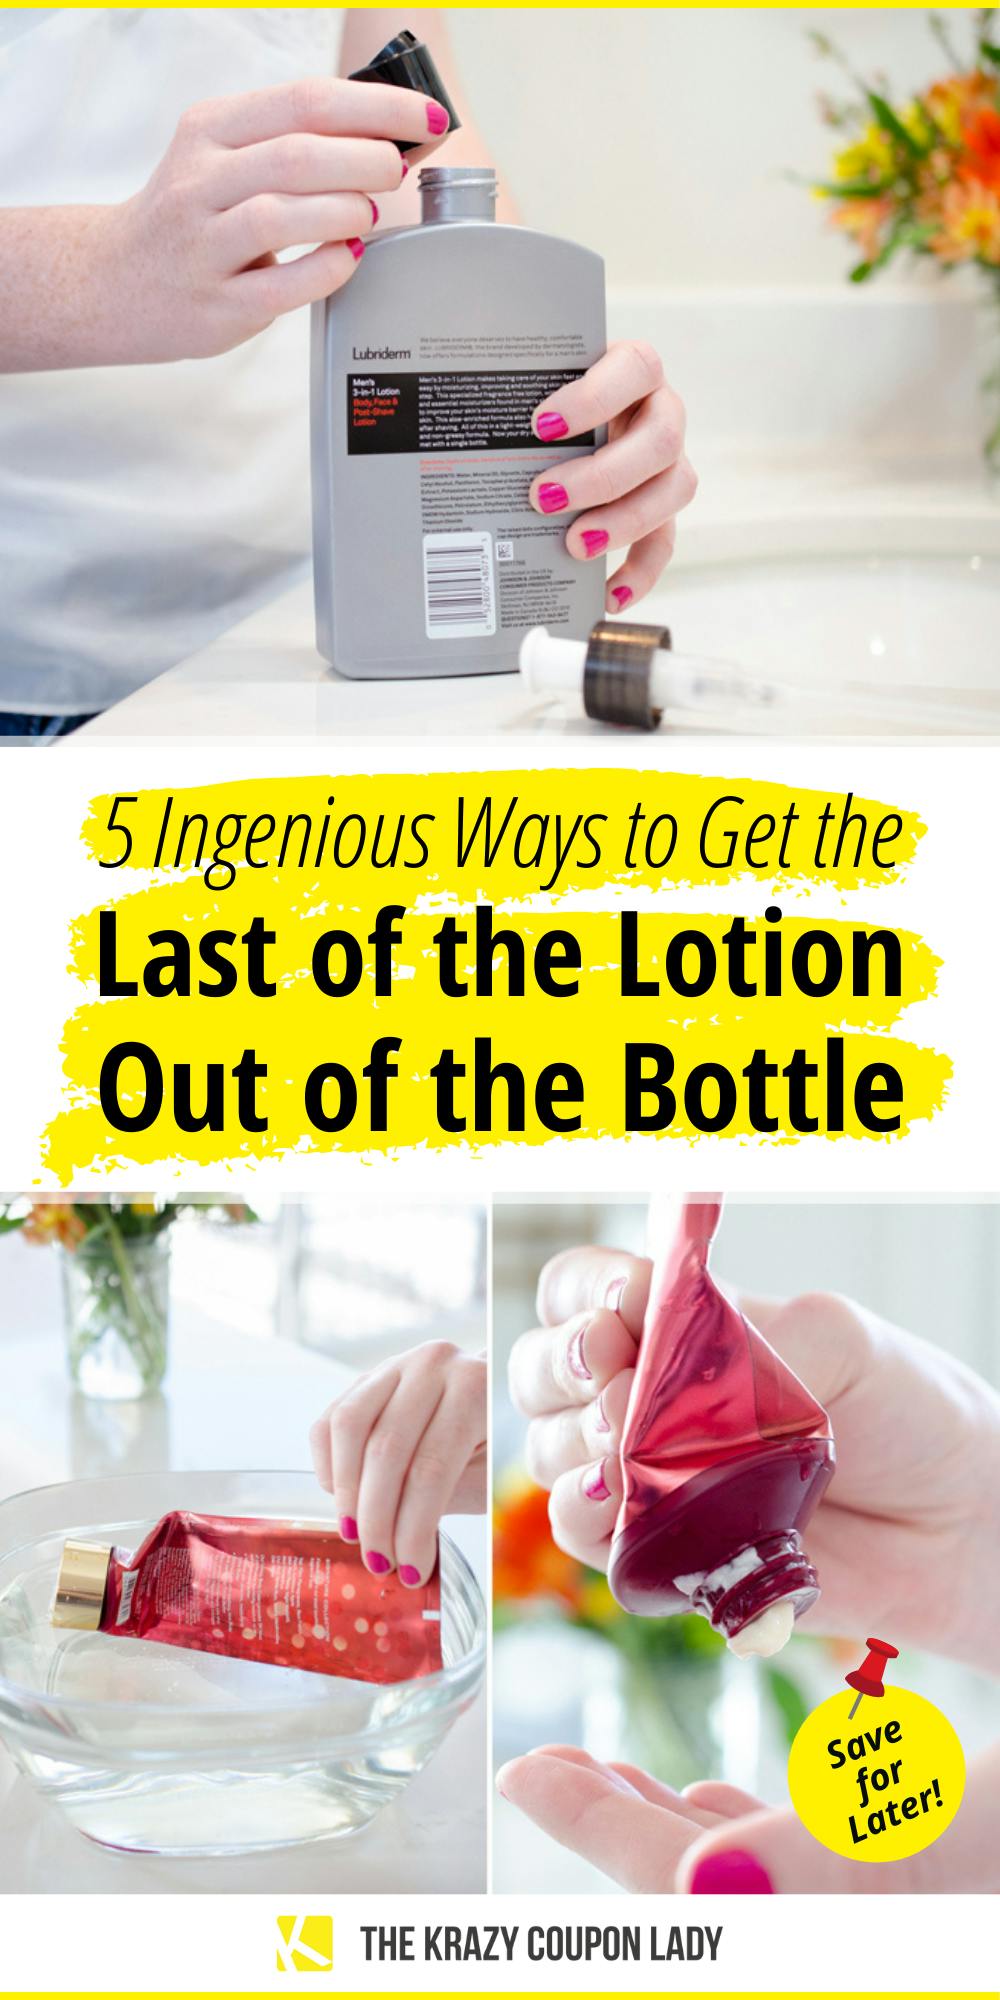 5 Ingenious Ways to Get the Last of the Lotion Out of a Bottle